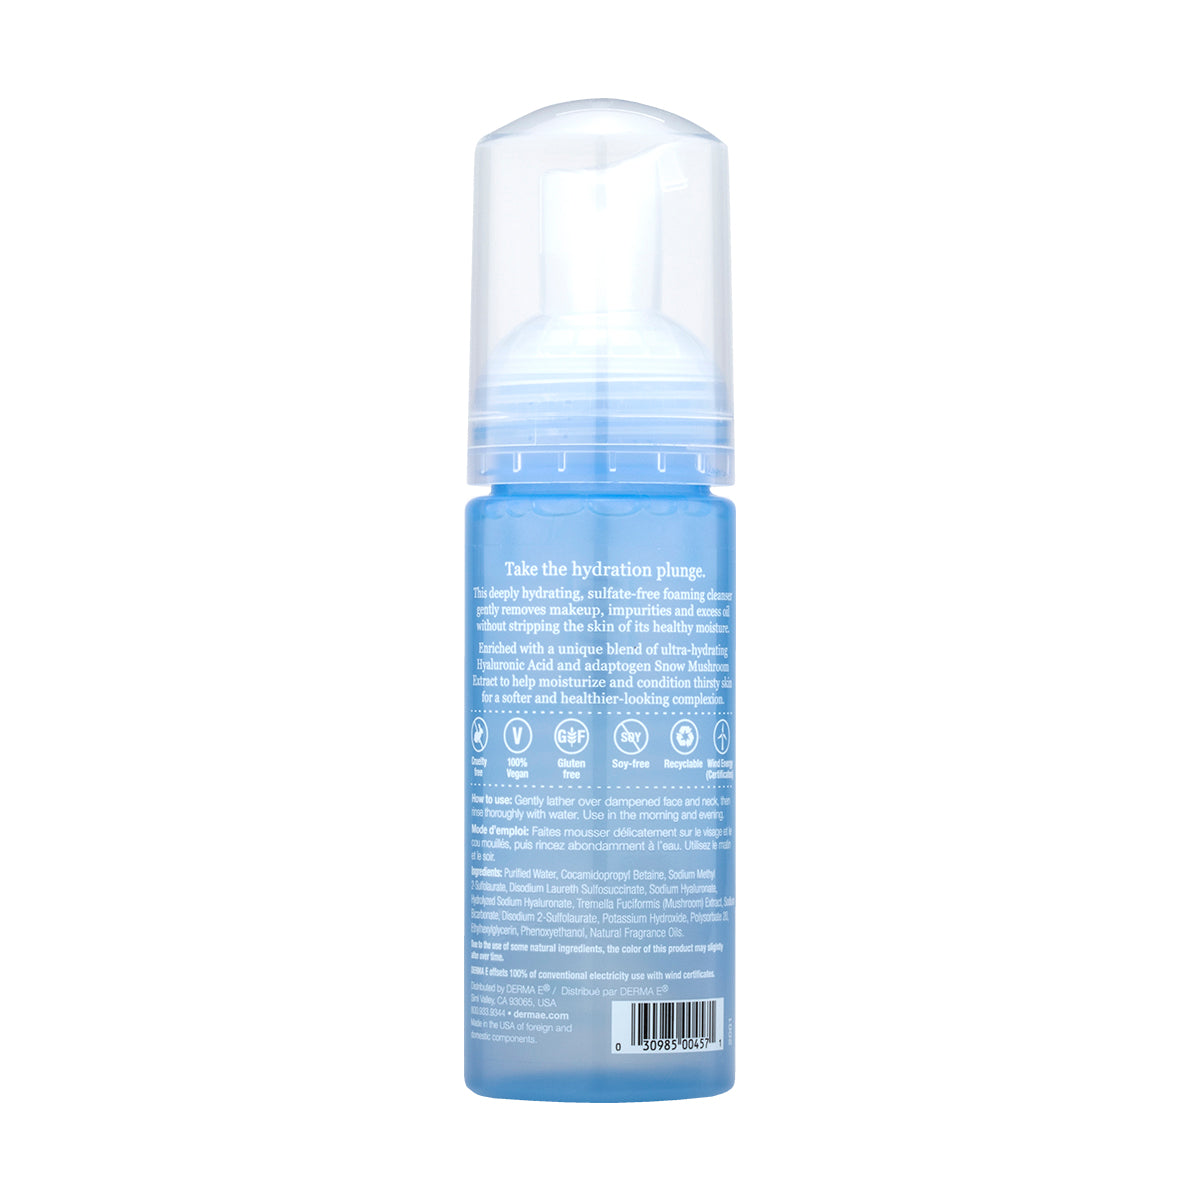 Hydrating Facial Alkaline Cloud Cleanser - by DERMA E |ProCare Outlet|